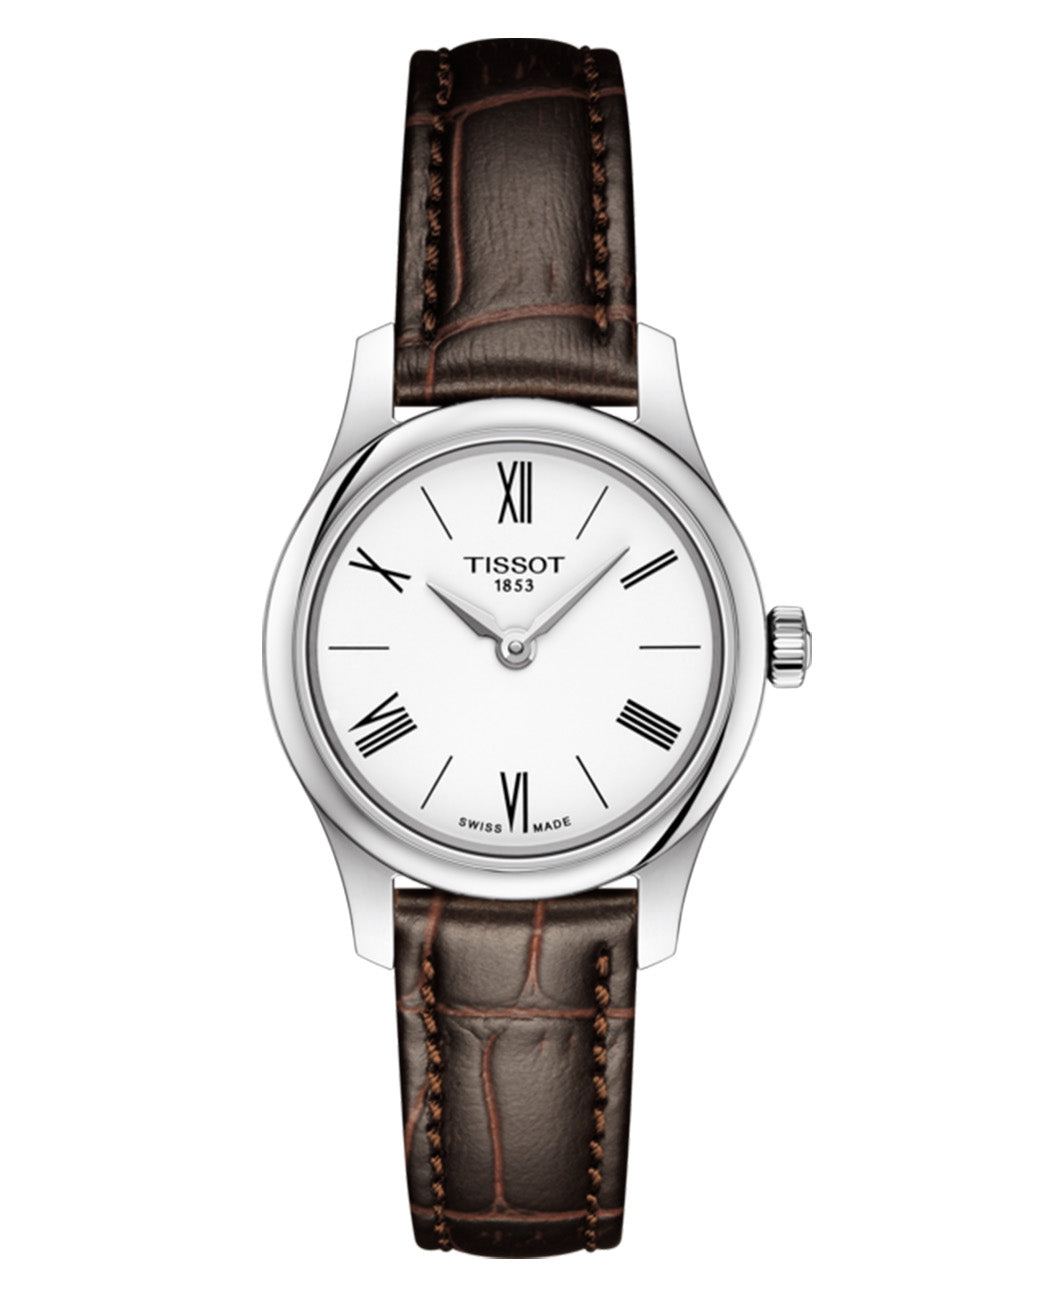 Tissot Tradition 5.5 Ladies Leather Strap Watch